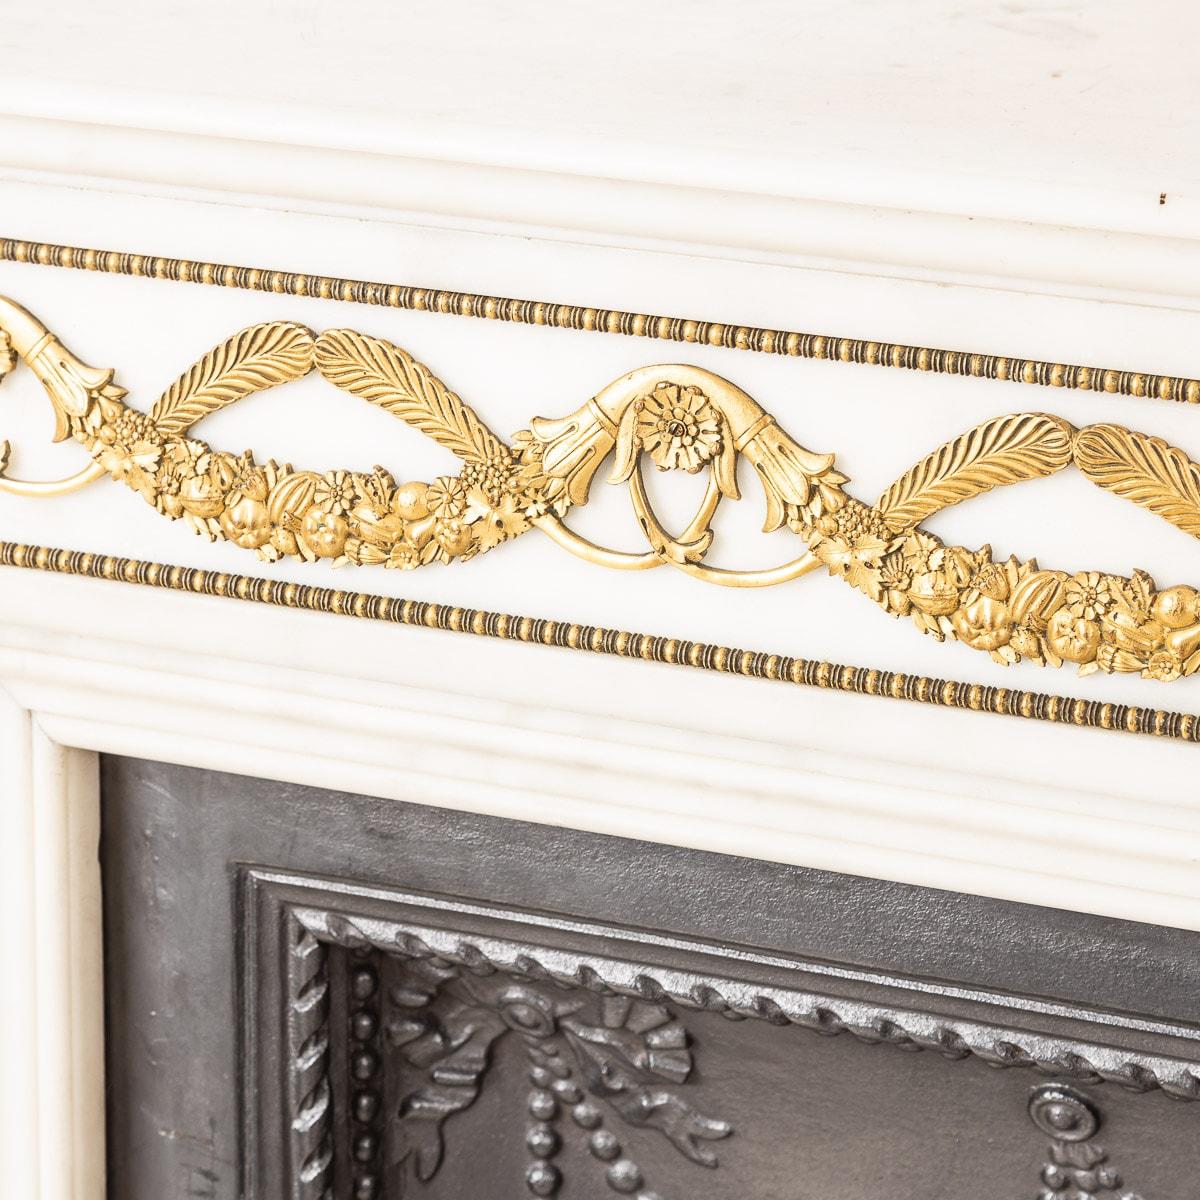 19th Century French Ormolu & White Marble Fireplace with Iron Inserts, c.1850 9